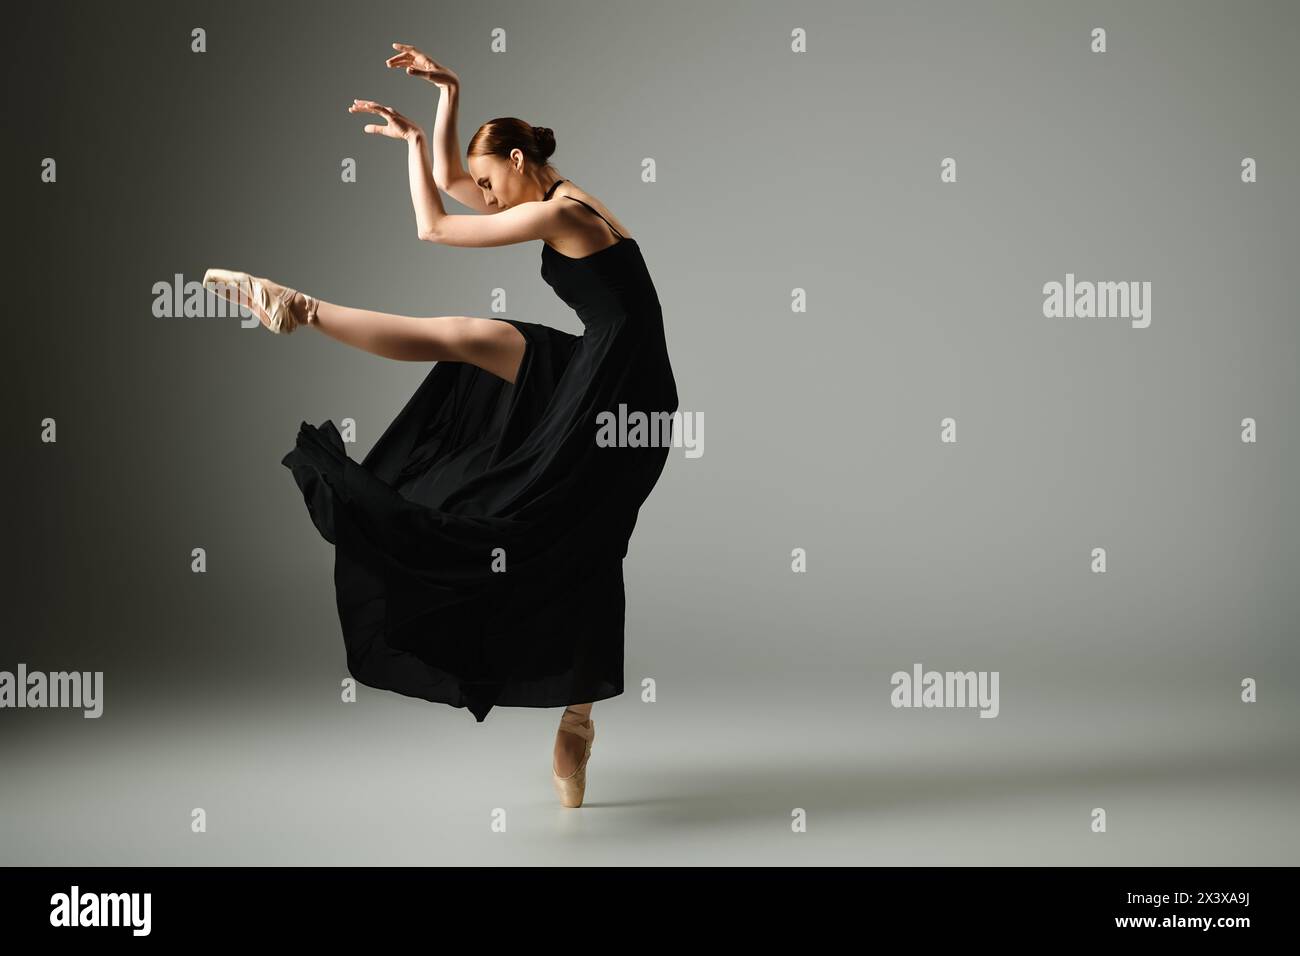 A young, beautiful ballerina in a black dress dances elegantly. Stock Photo